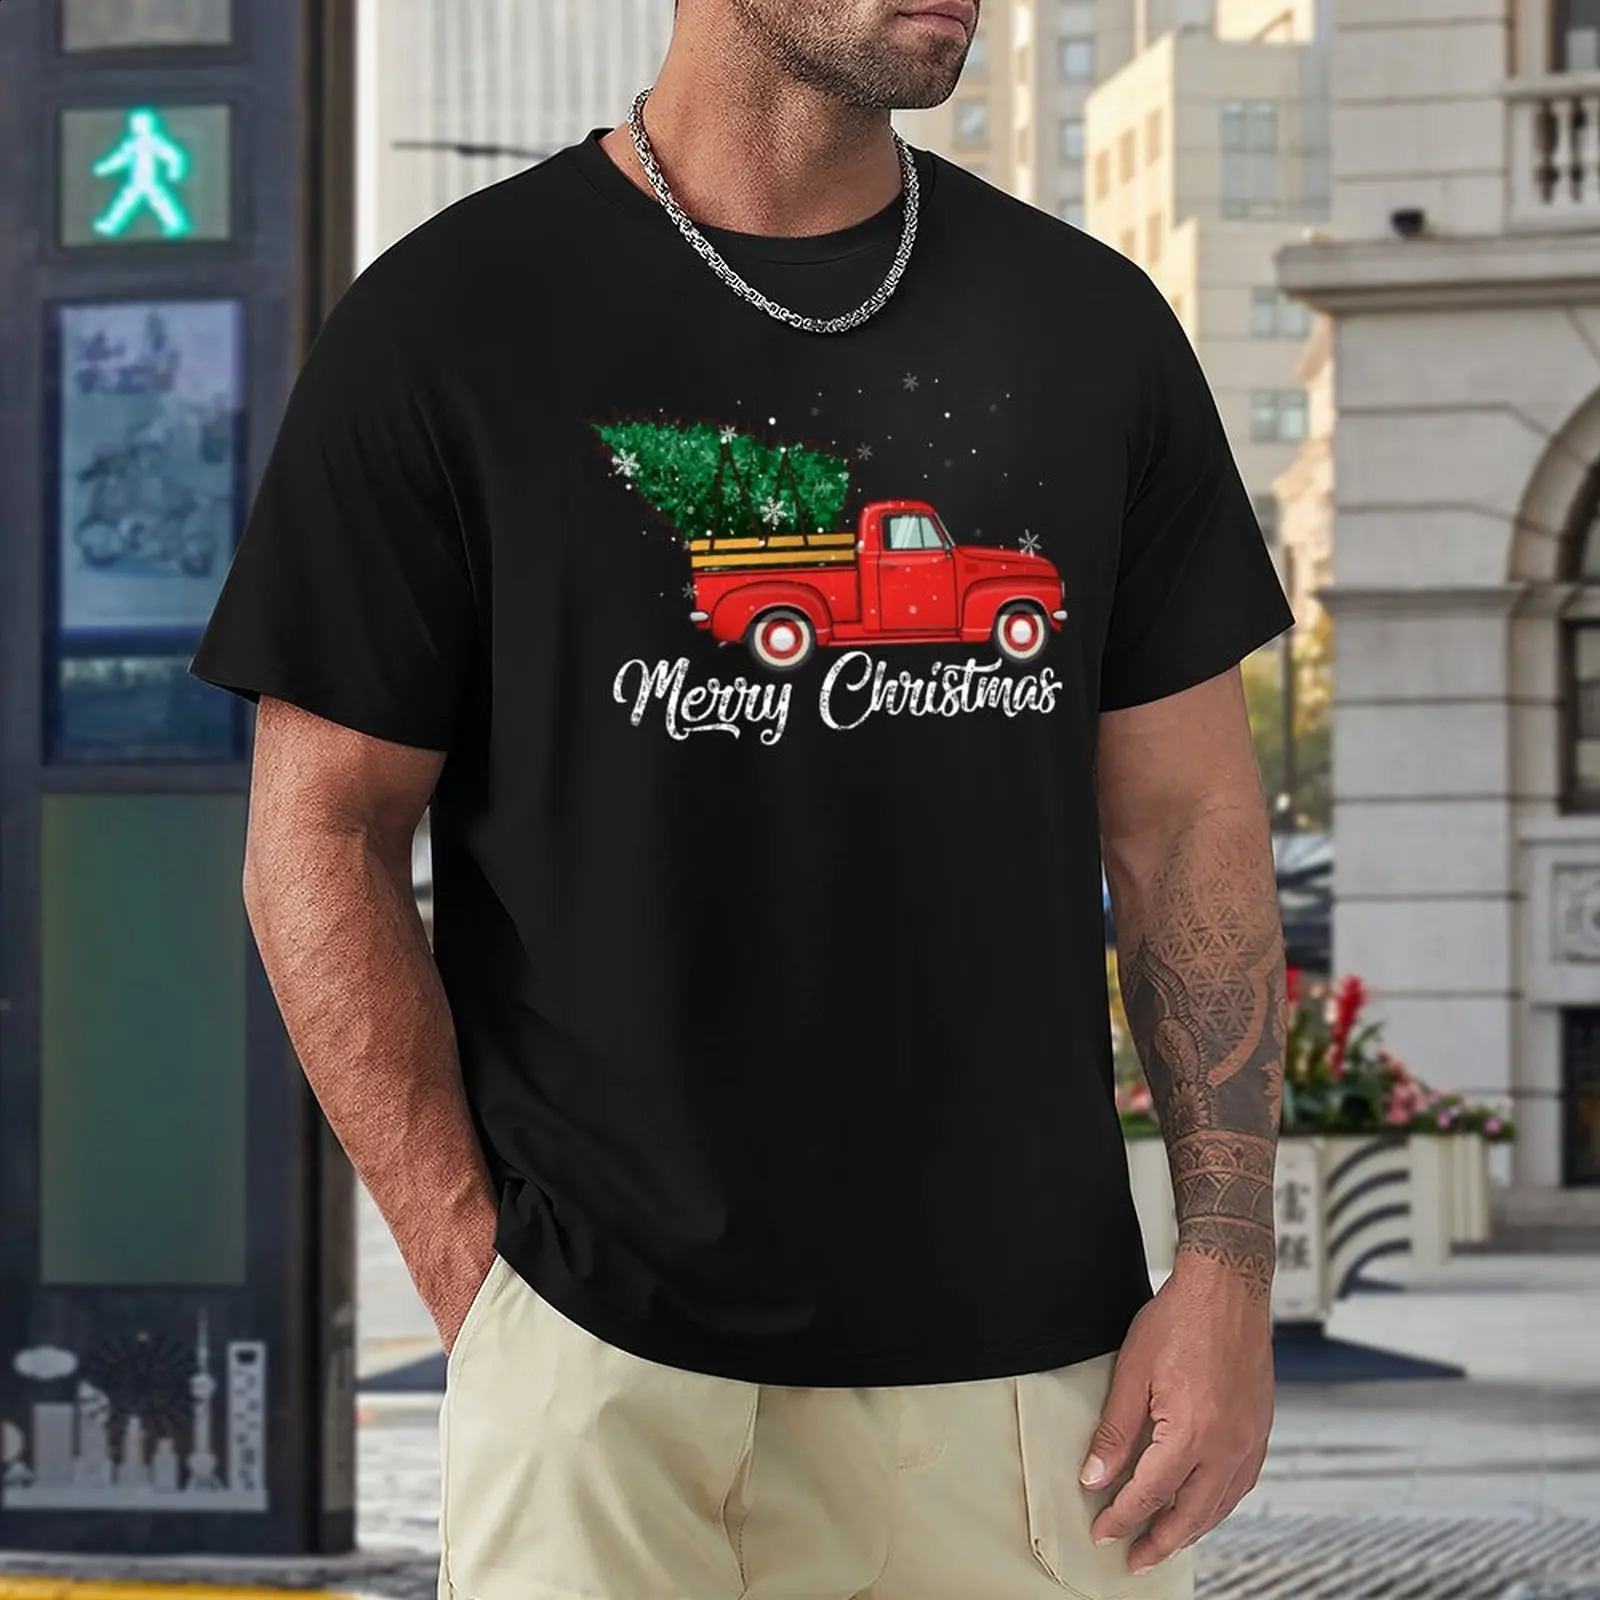 Men's T-Shirts Red Truck Pick Up Christmas Tree Vintage Retro Sweater Gift For Men And Women Halloween day Thanksgiving day Christma T-Shirt 231118